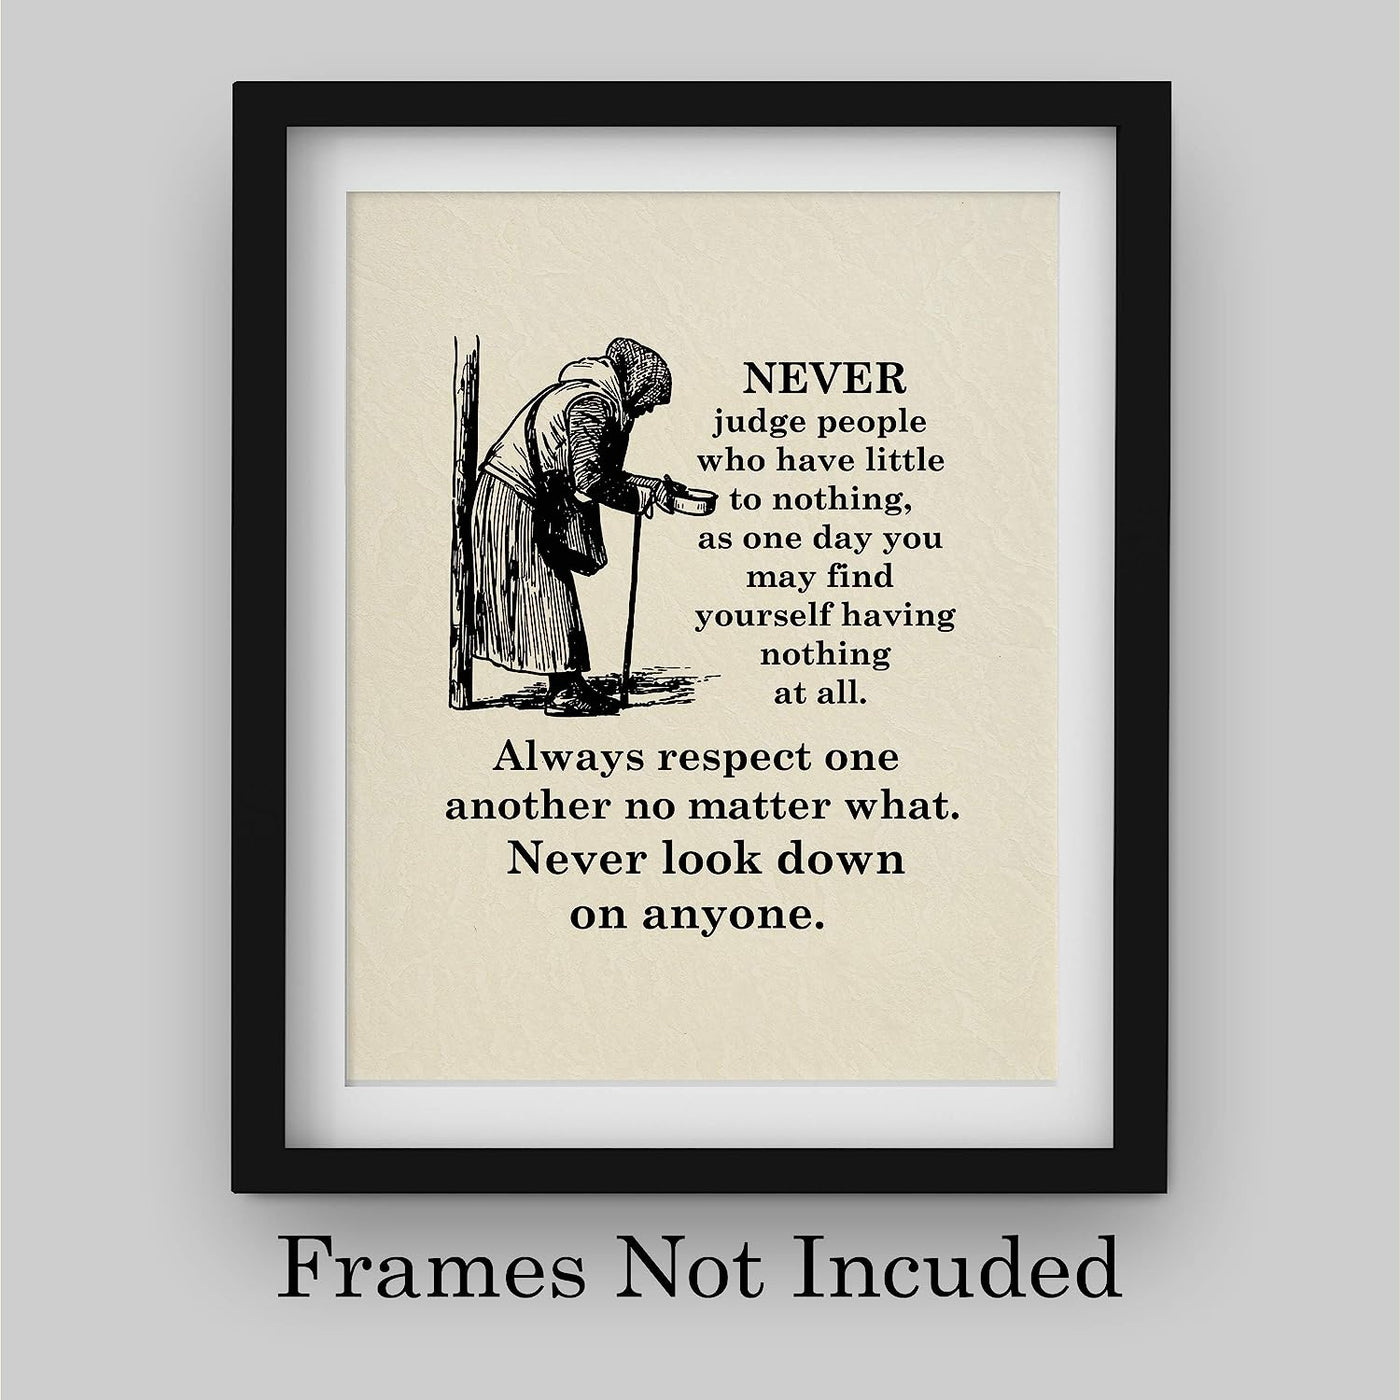 Never Judge People Who Have Little To Nothing Inspirational Quotes Wall Sign -8 x 10" Wall Art Print-Ready to Frame. Modern Typographic Design. Home-Office-School Decor. Reminder-Respect Others!